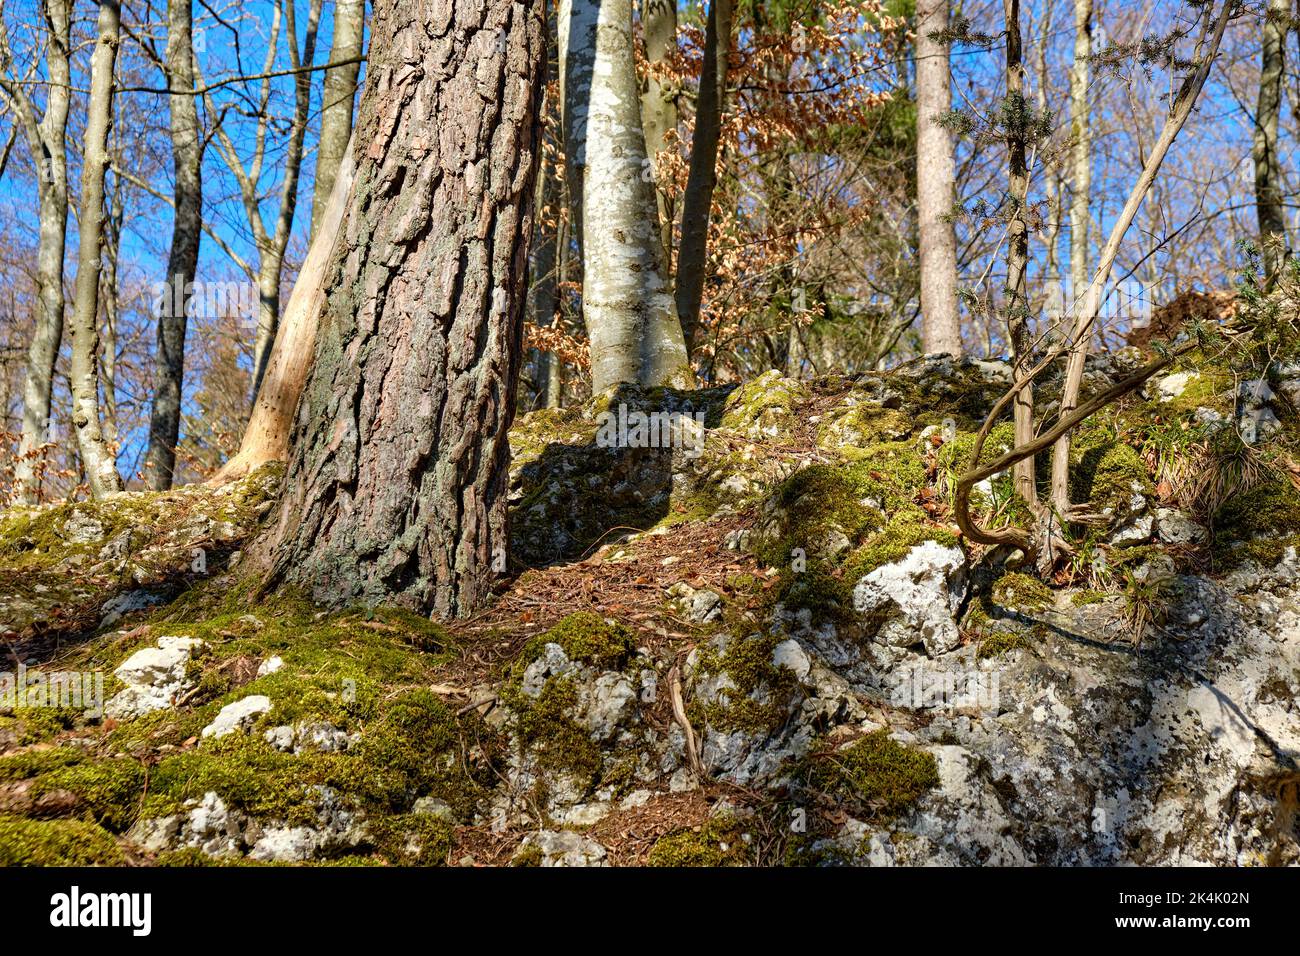 Lower part of trees and limestone rocks, here on the basis of a forest area in the Swabian Alb near Burladingen, Baden-Wurttemberg, Germany. Stock Photo